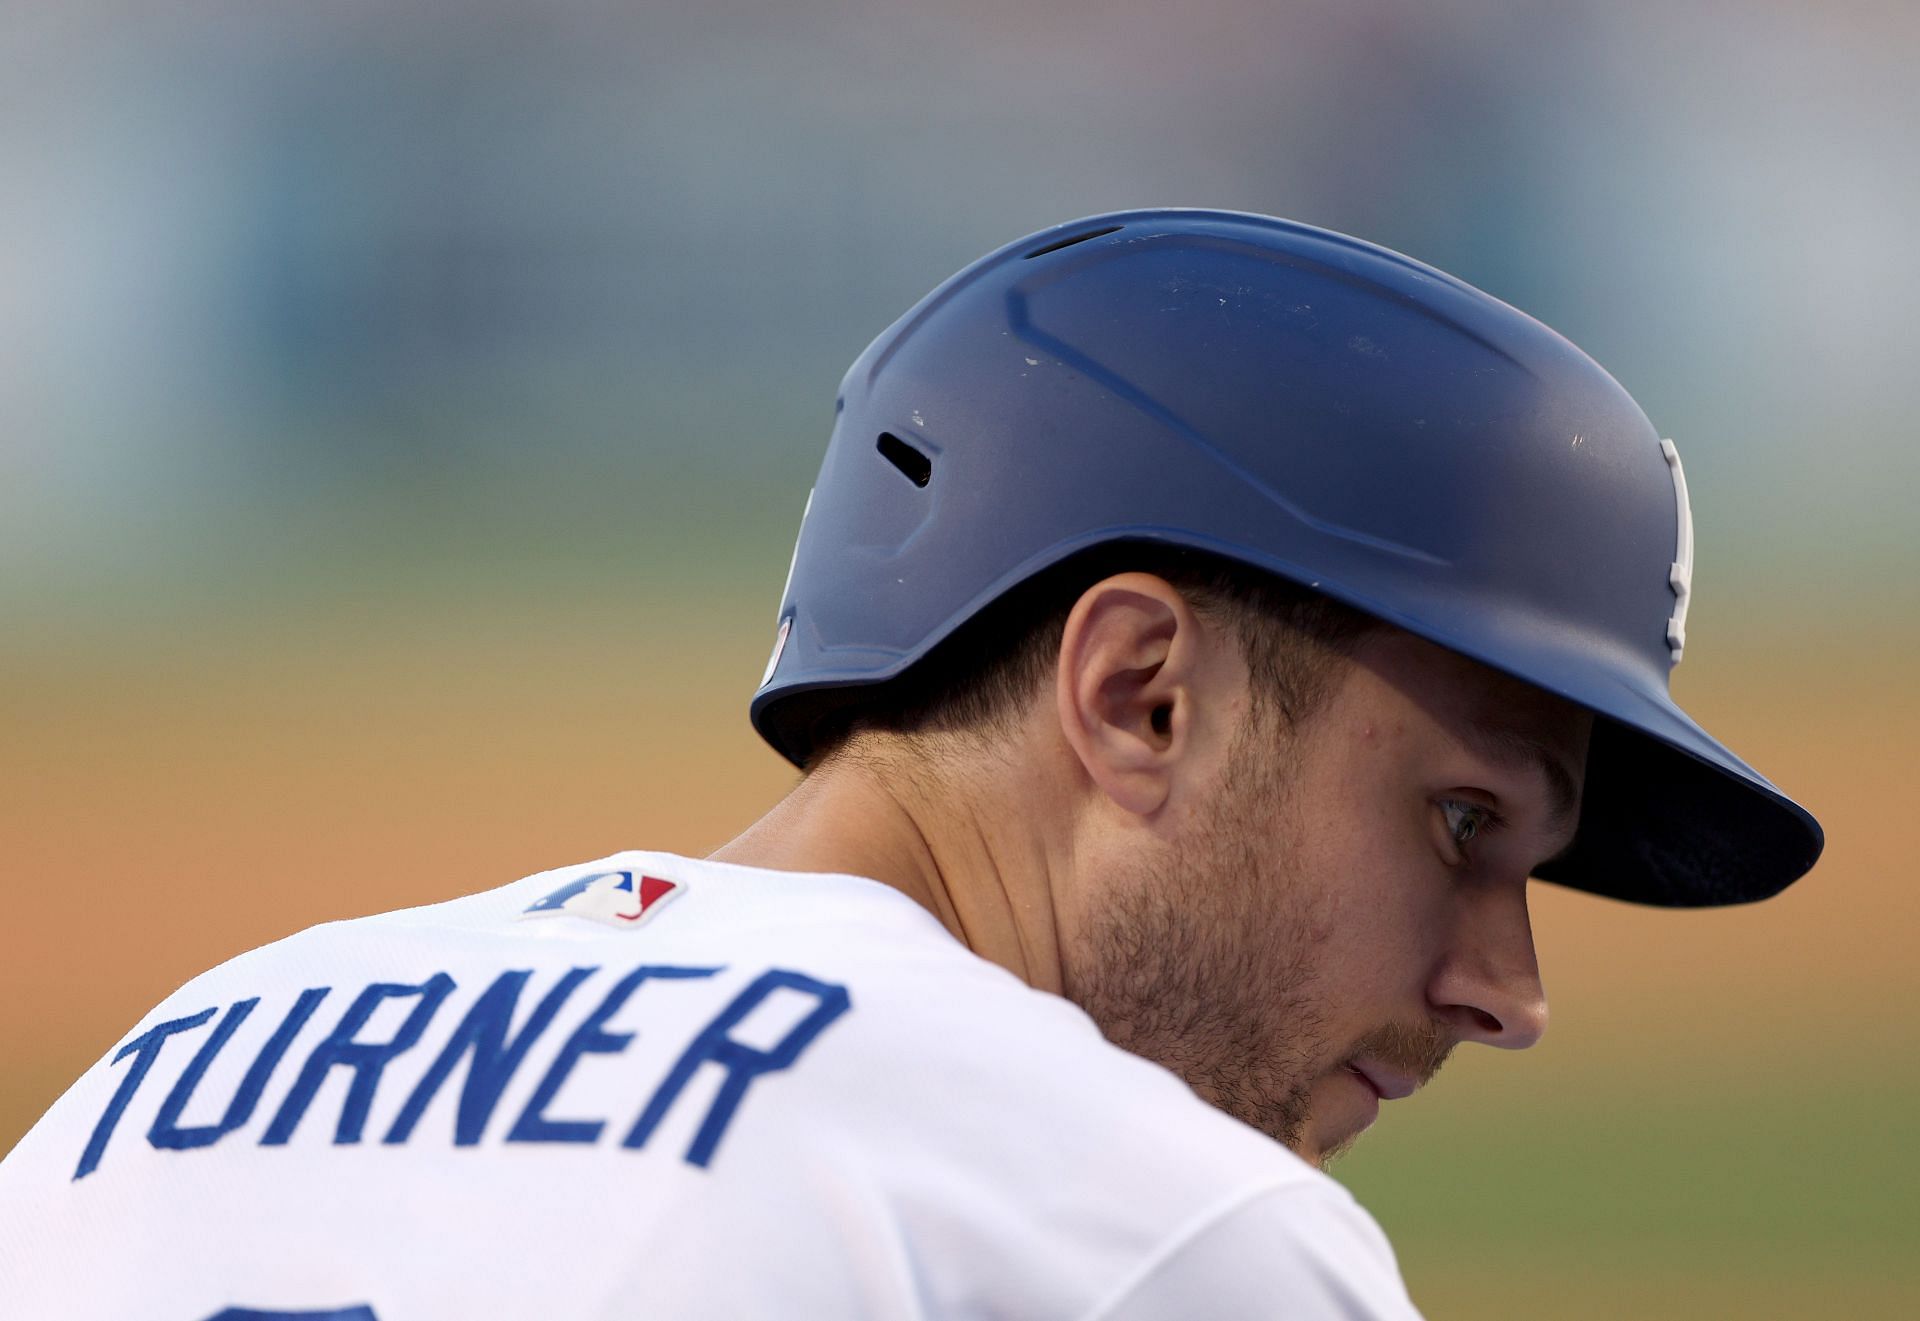 Trea Turner makes his Phillies debut in the leadoff spot to great success